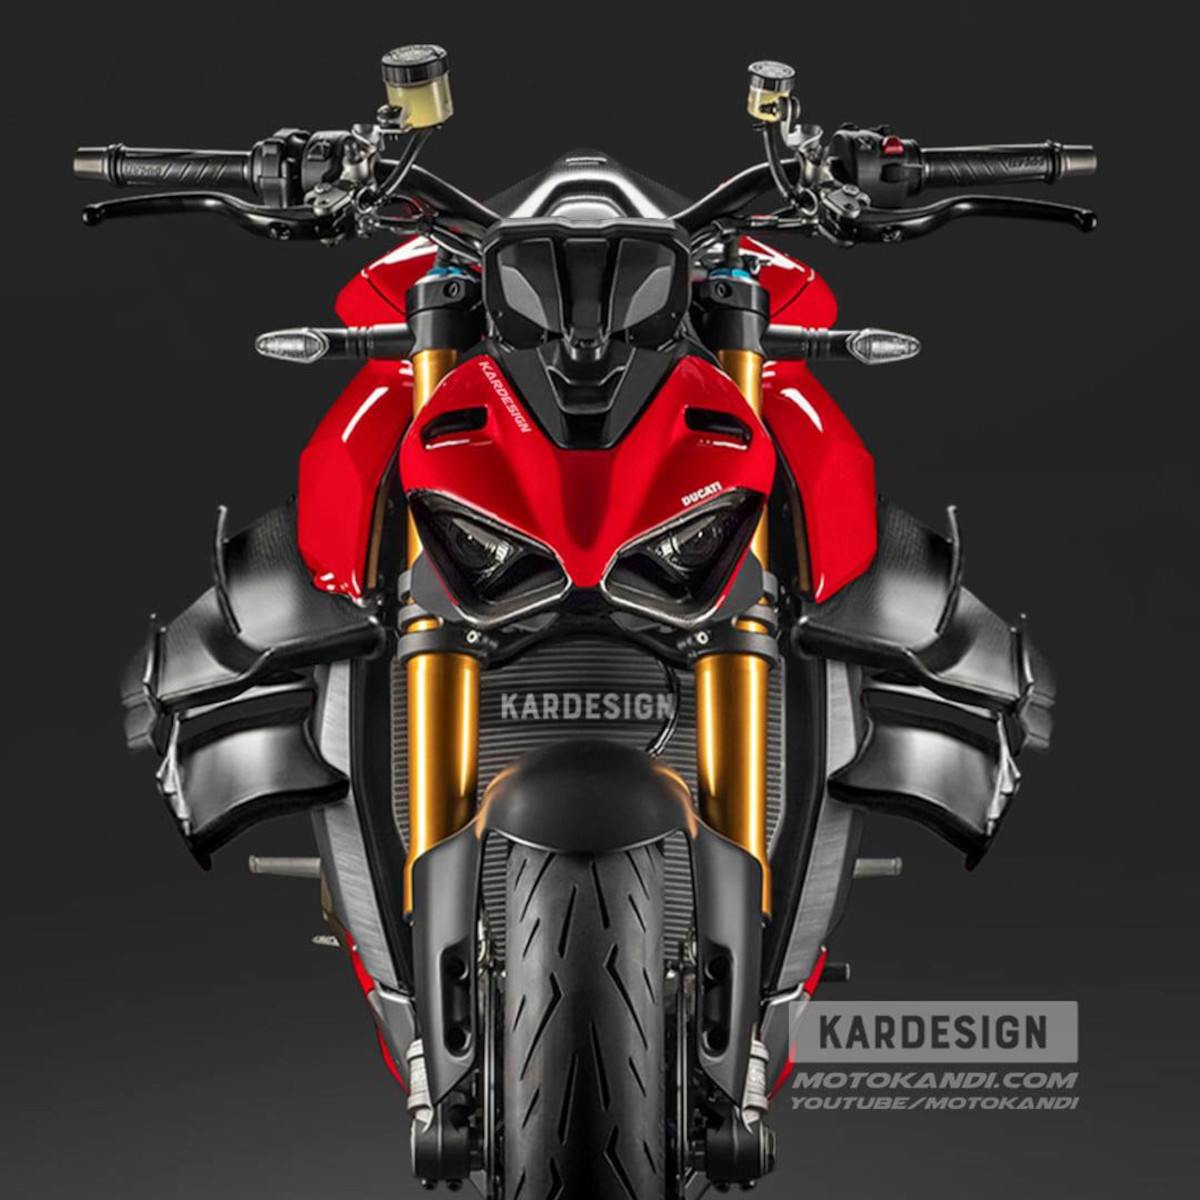 Cover-Naked-Ducati-Superlegerra-Streetfigther-Panigale V4RR-Kardesigns